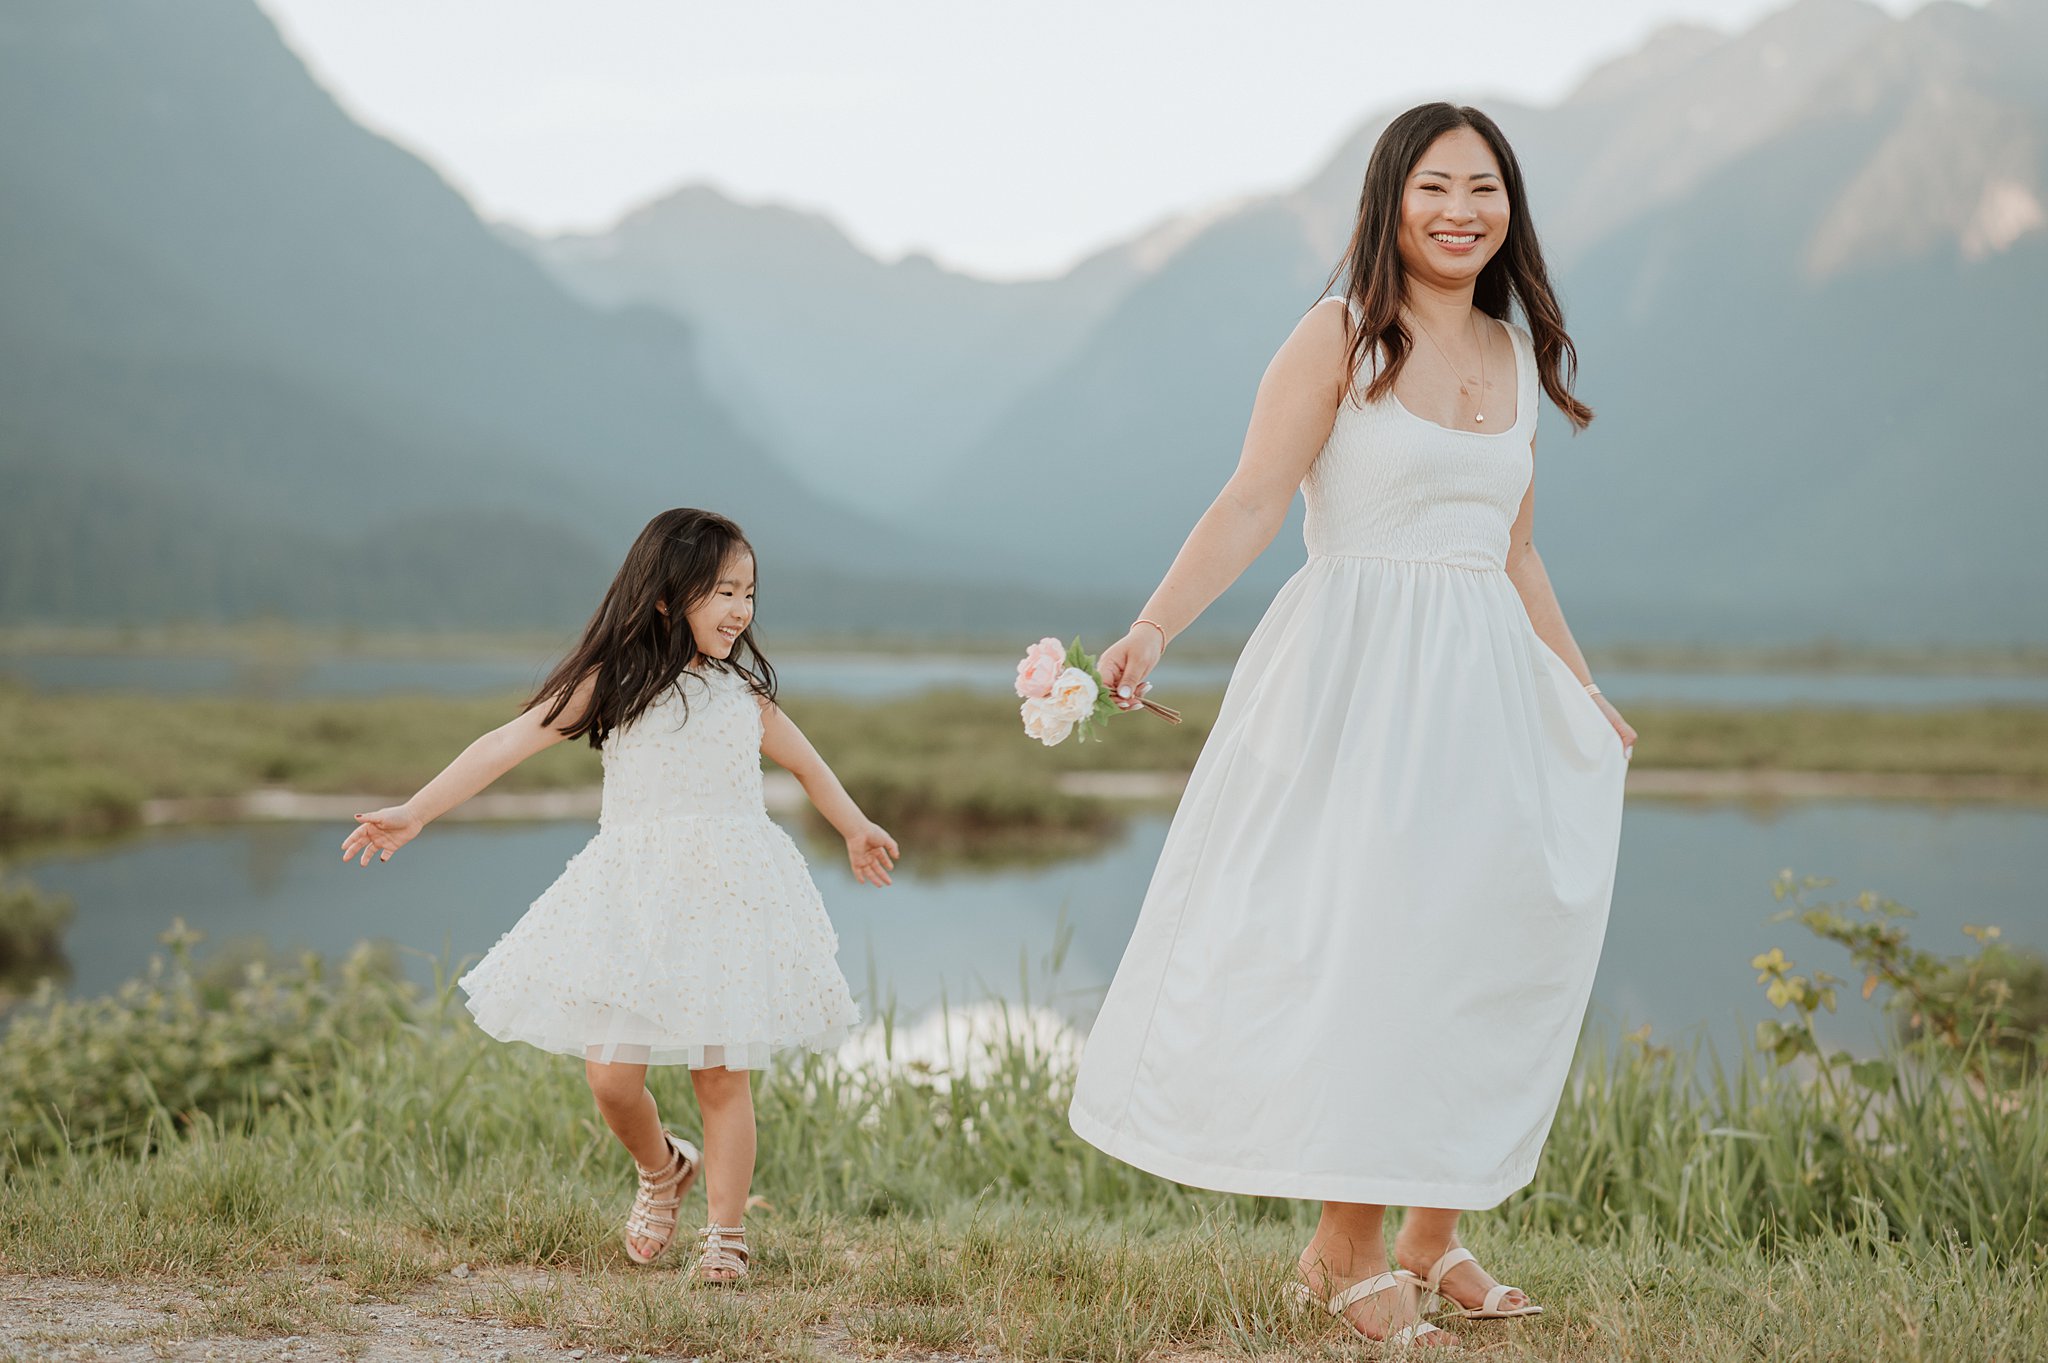 A mother and daughter in white dresses play and dance by a mountain lake at sunset before visiting vancouver toy stores